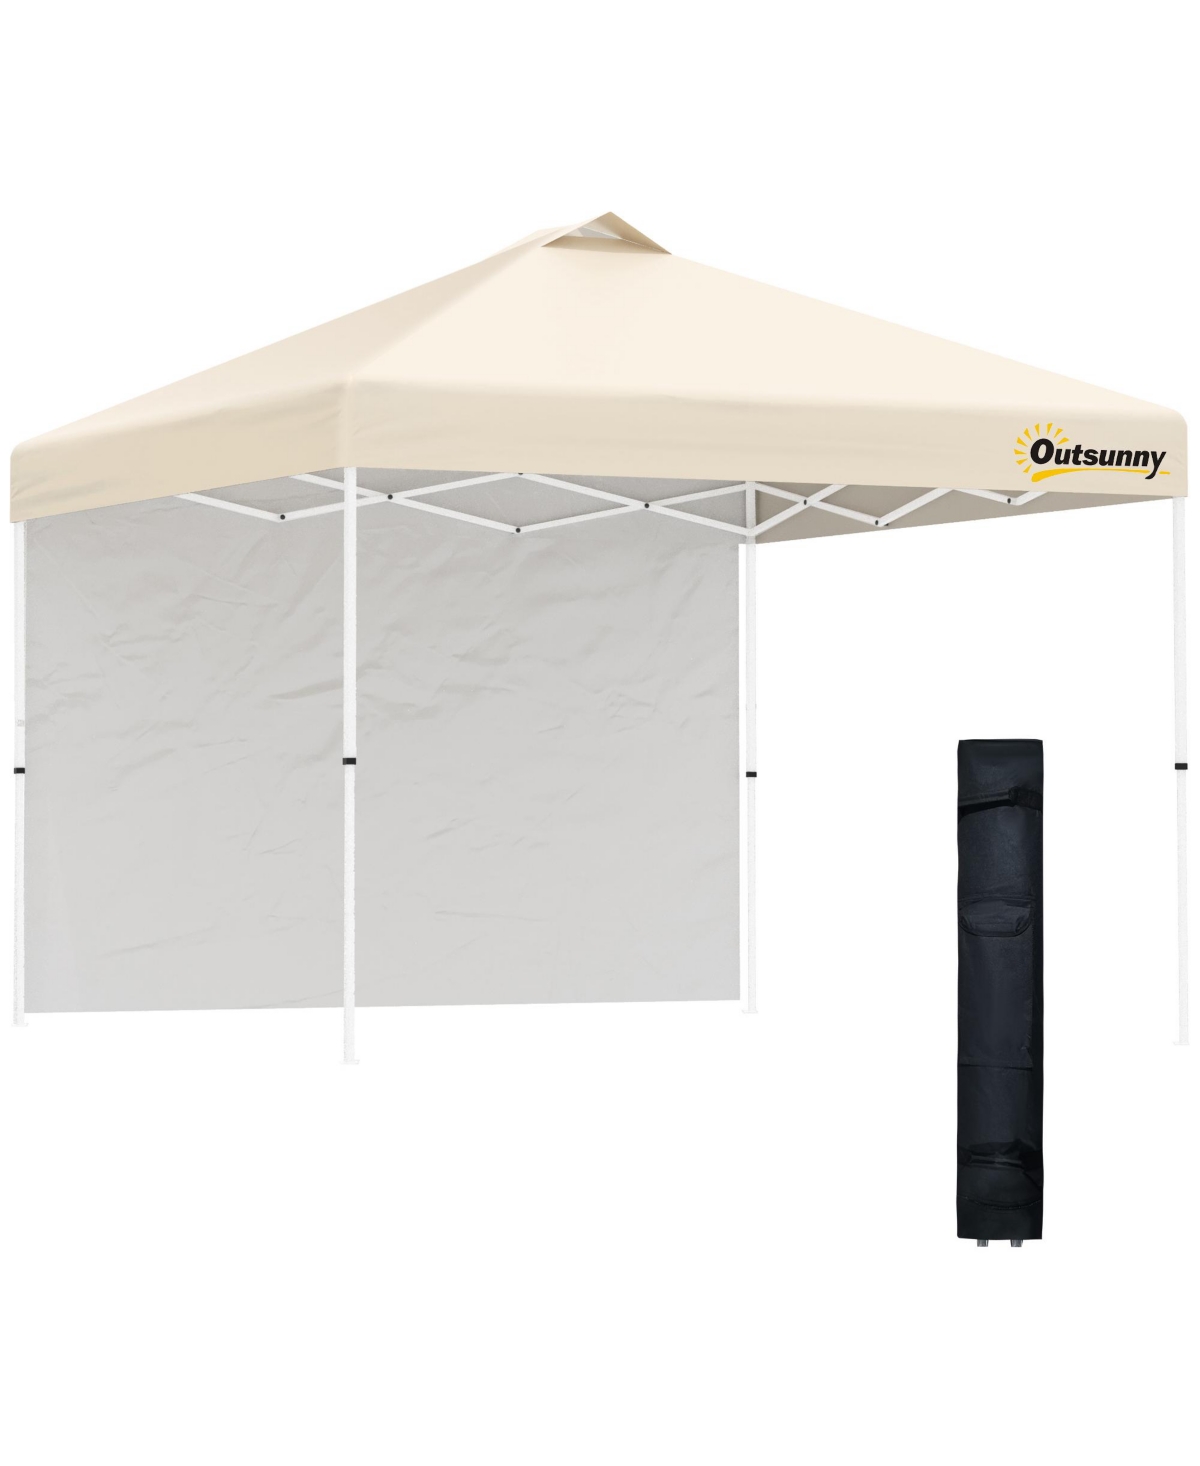 10'x10' Pop Up Canopy Tent with Removable Sidewall - Beige/khaki